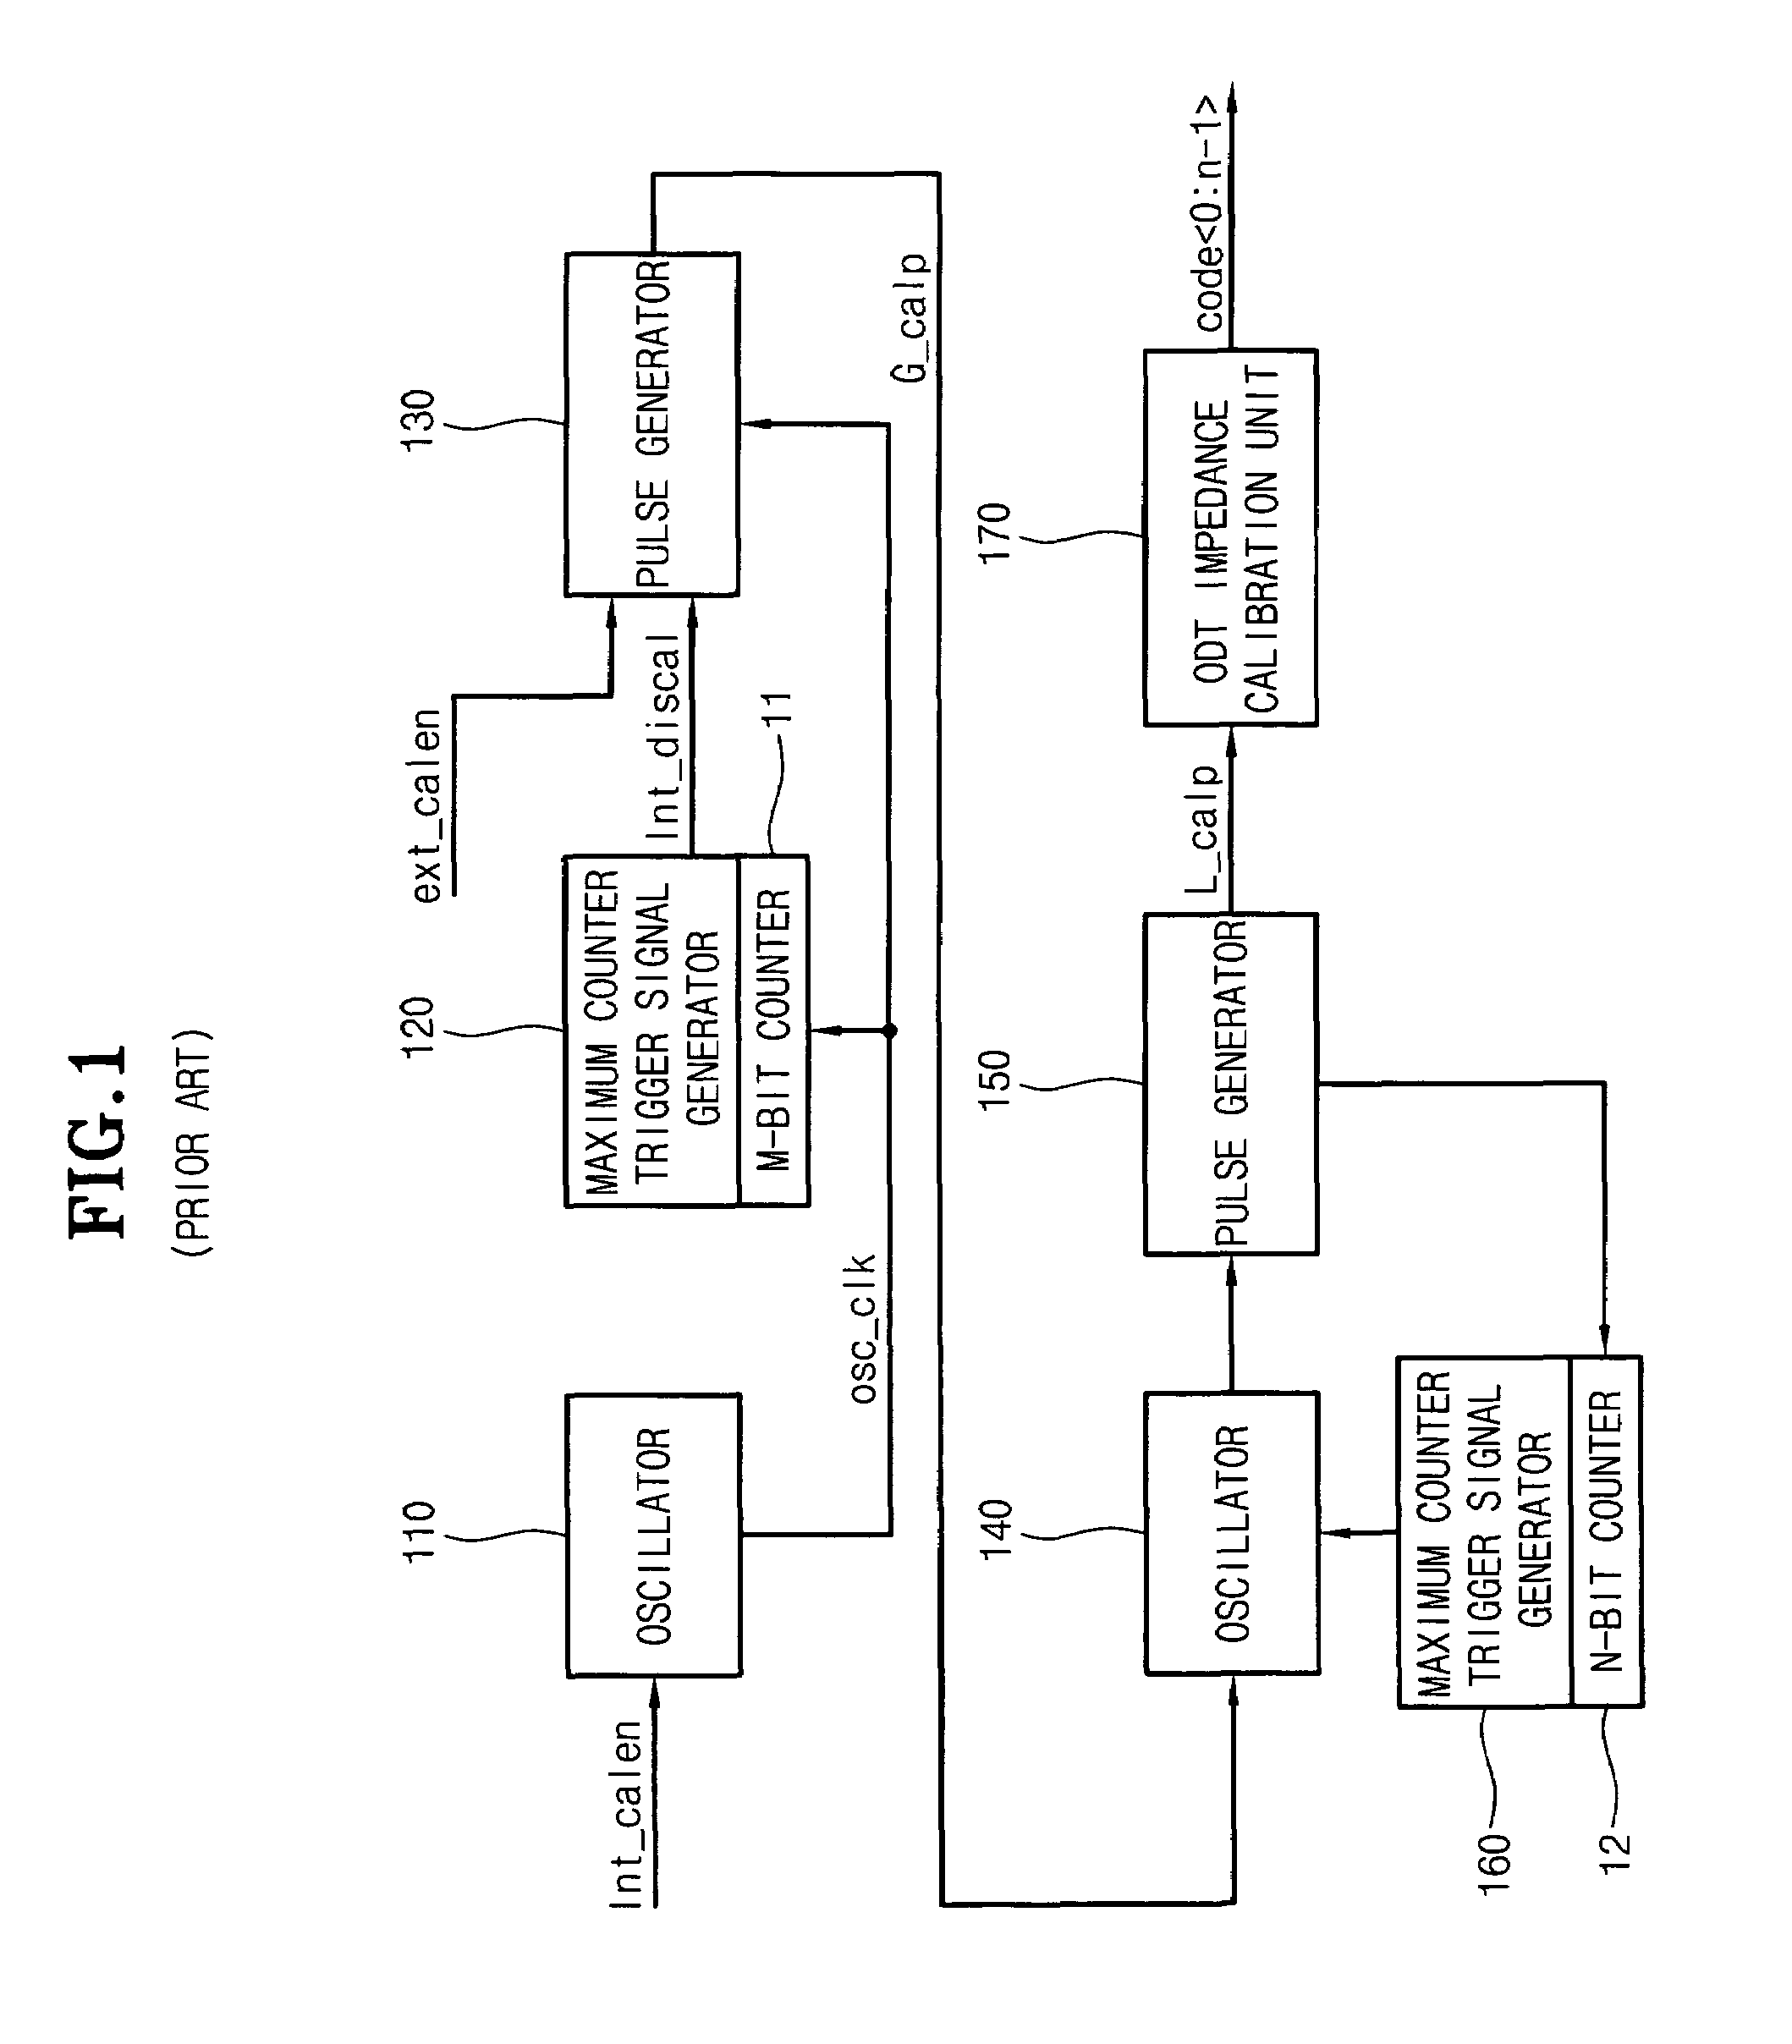 On-die termination impedance calibration device